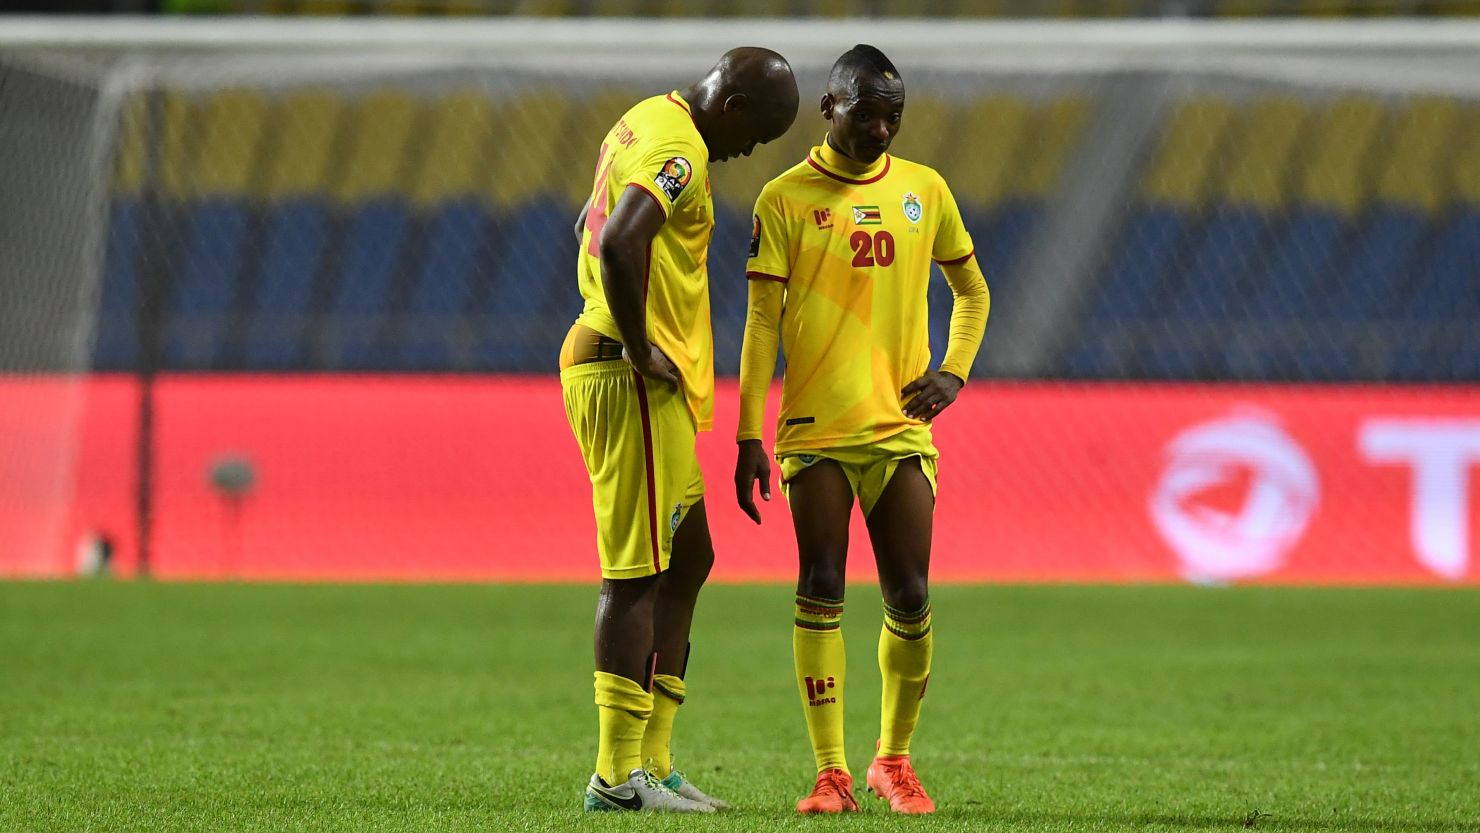 Despite scoring two goals apiece on Matchday 3, Zimbabwe and Algeria were unable to book their place in the AFCON quarterfinals